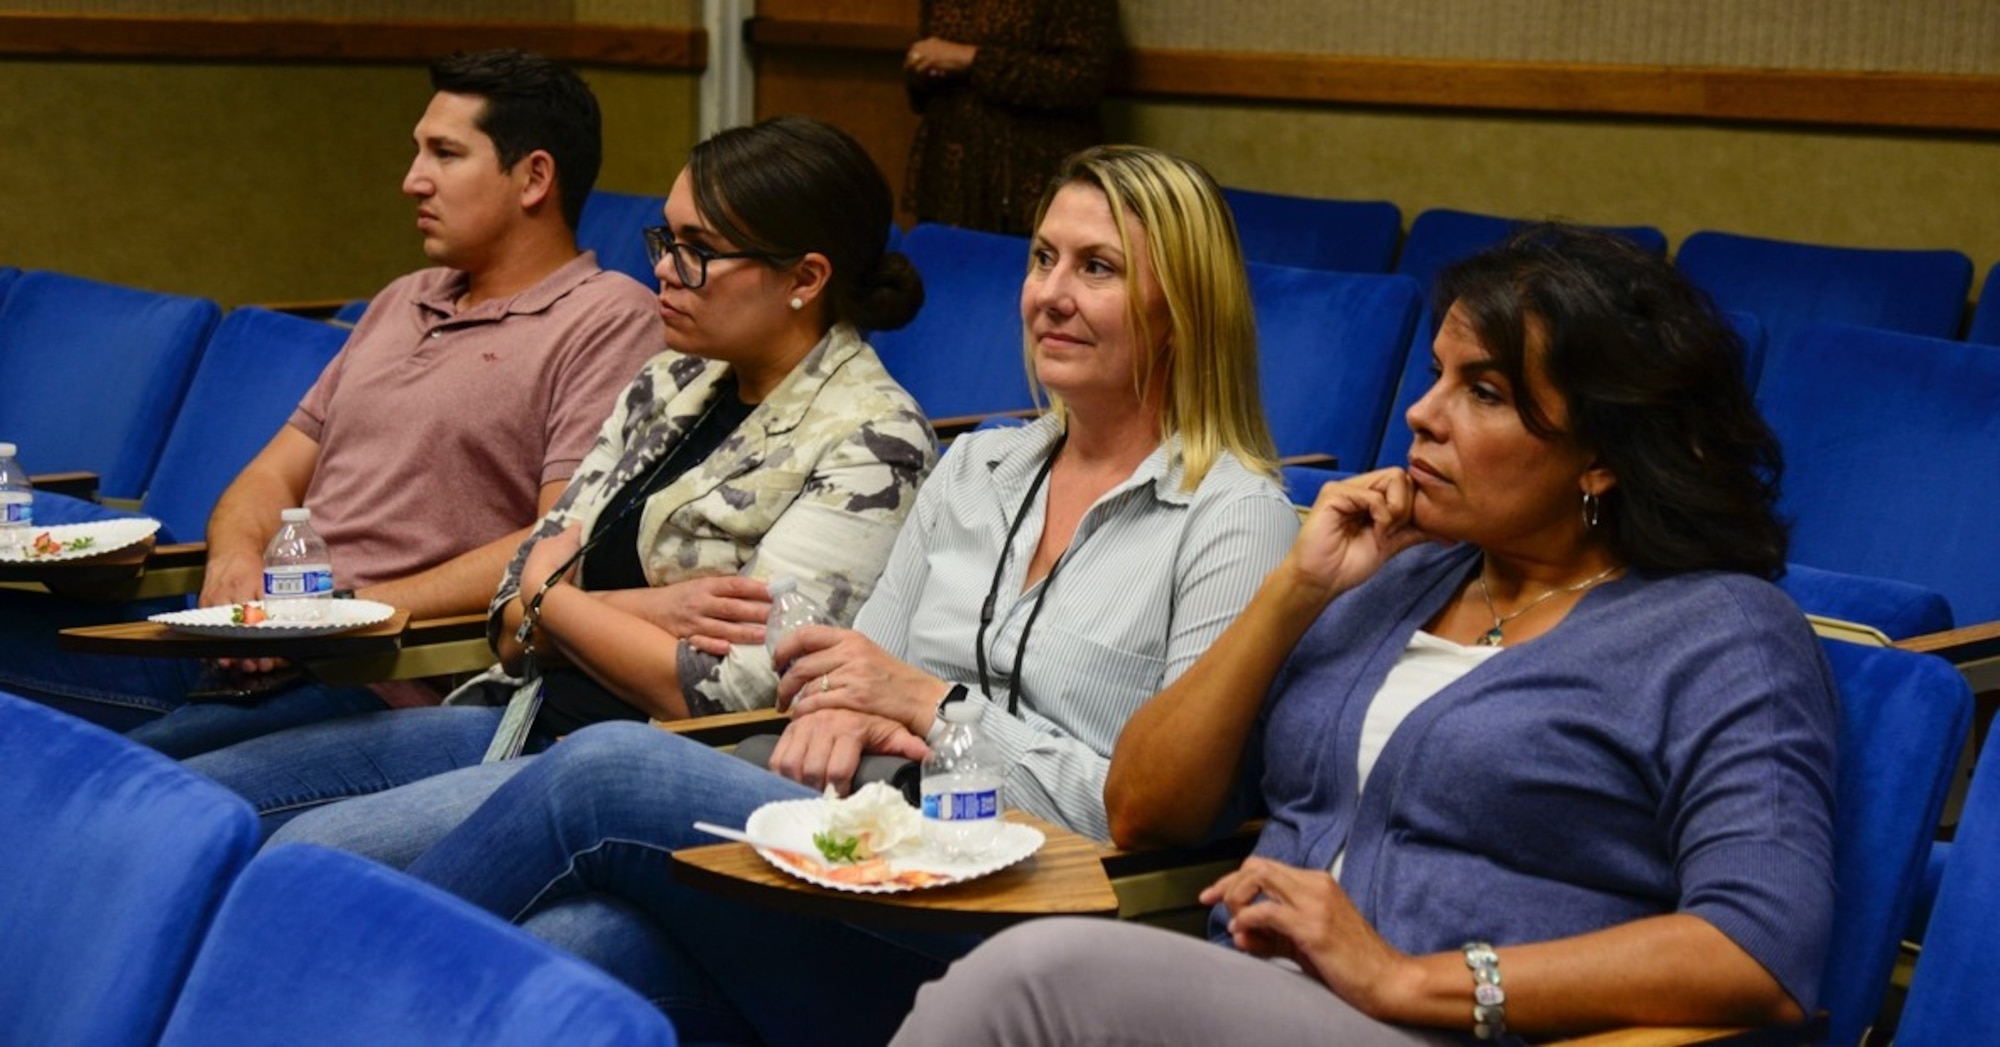 Members of Team Kirtland watch various ‘TED’ talks during the Women’s Equality Day event at Kirtland Air Force Base, N.M., August 26, 2019.  In 1973, Congress officially designated August 26 as Women’s Equality Day to commemorate the 1920 adoption of the 19th amendment of the U.S. constitution, making it illegal to deny citizens the right to vote based on their gender. (U.S. Air Force photo by Senior Airman Alexandria Crawford)